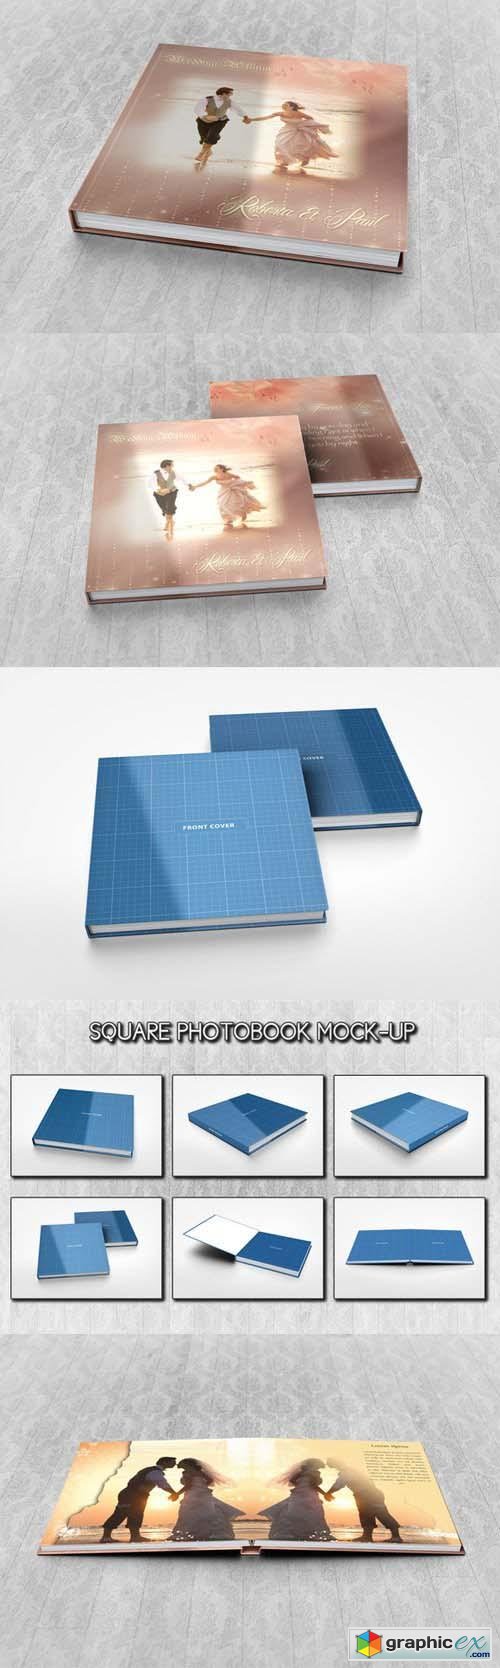 Download Square Photobook Mock-up 37516 » Free Download Vector Stock Image Photoshop Icon